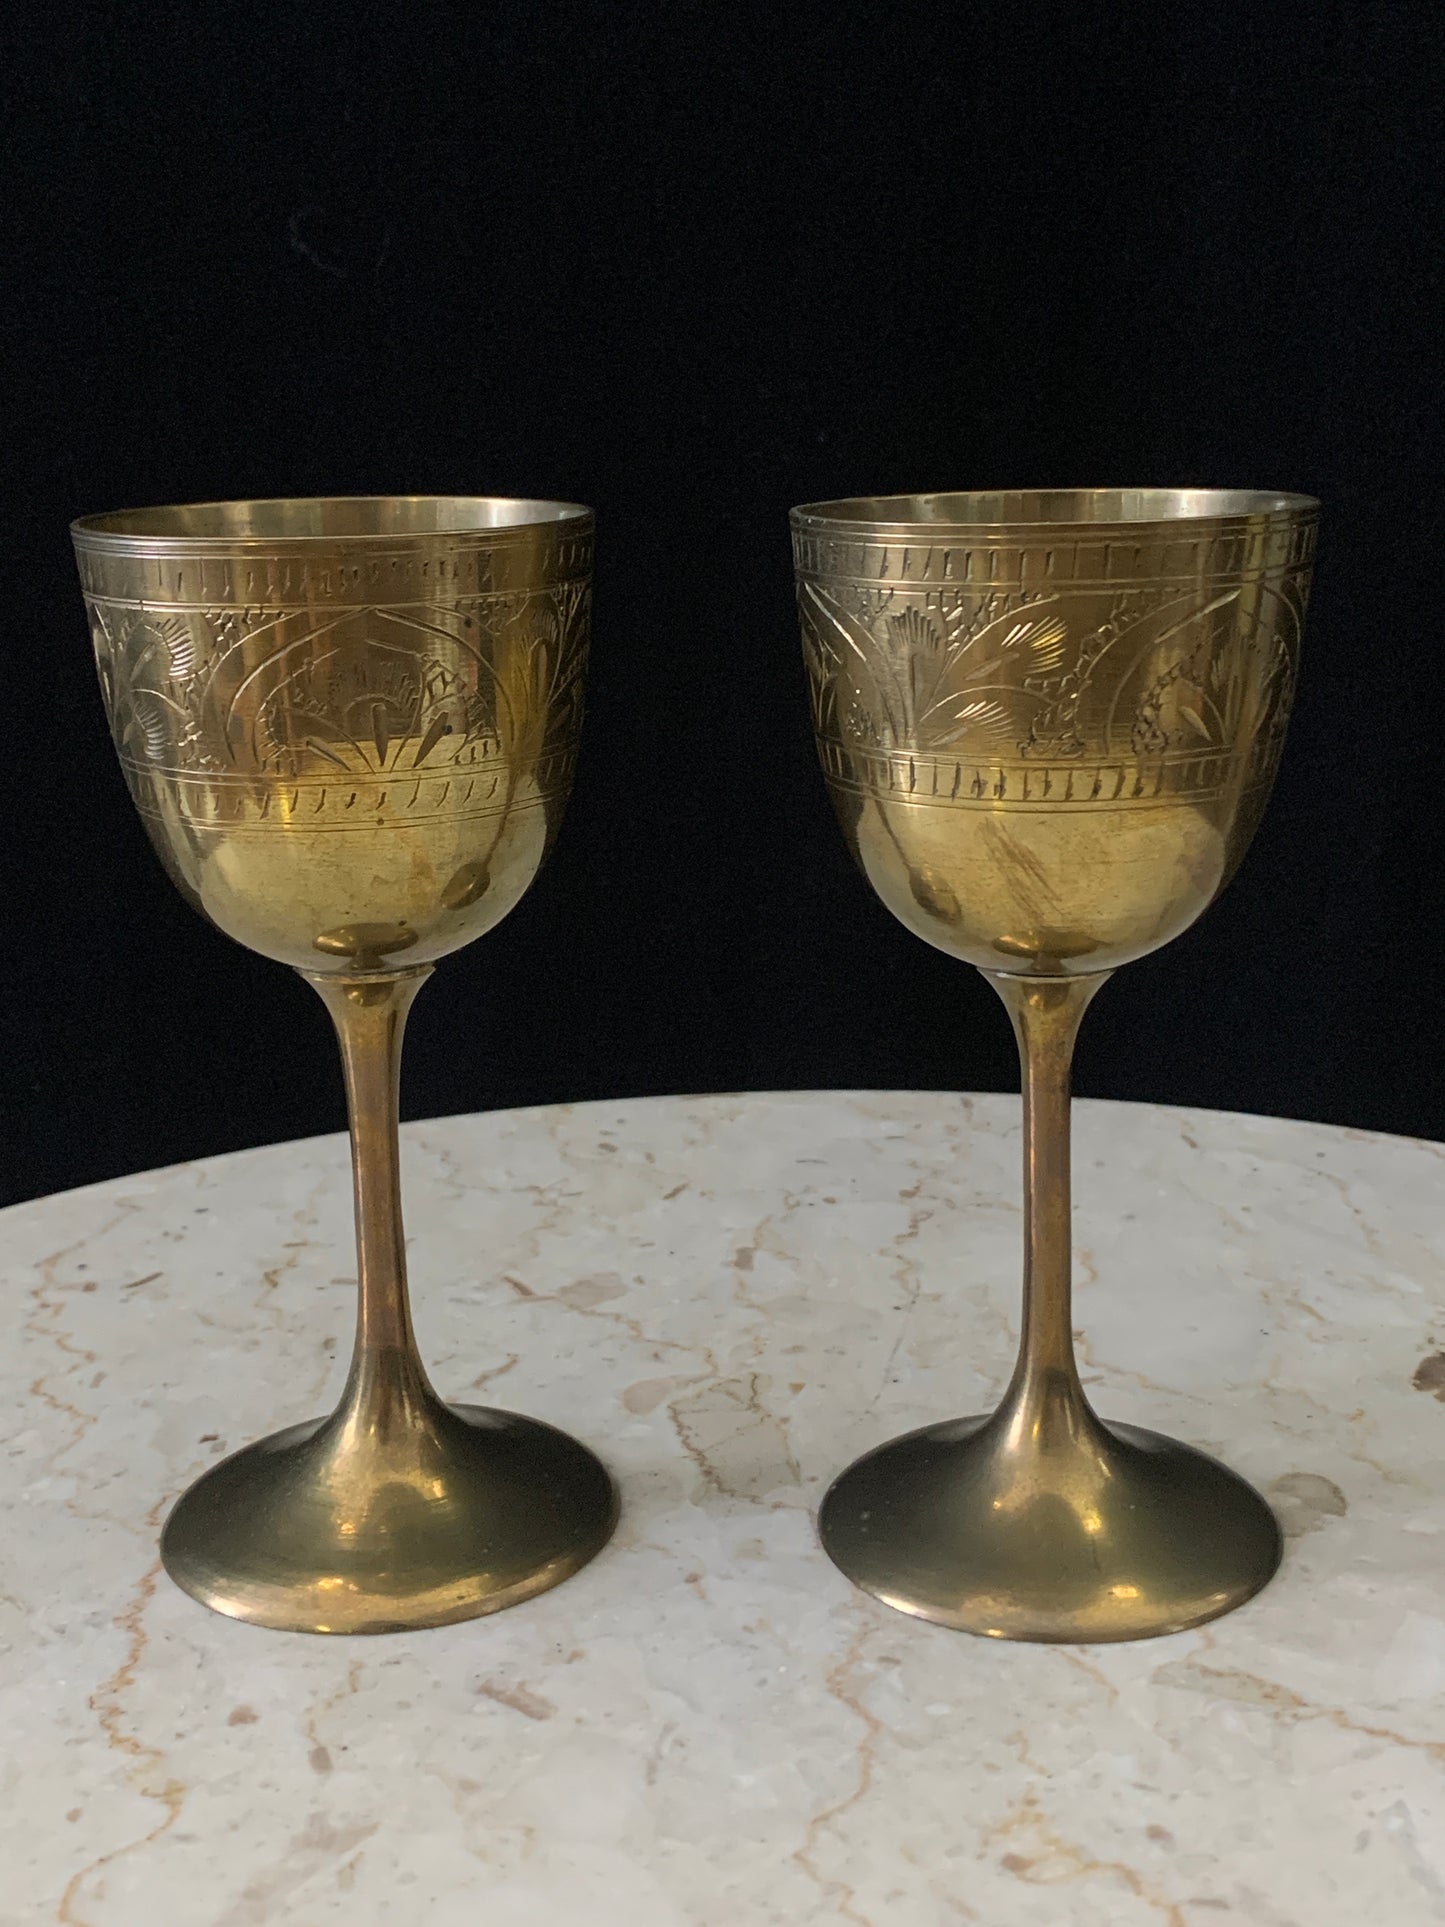 Pair of Brass Wine Goblets with Engraved Floral Design